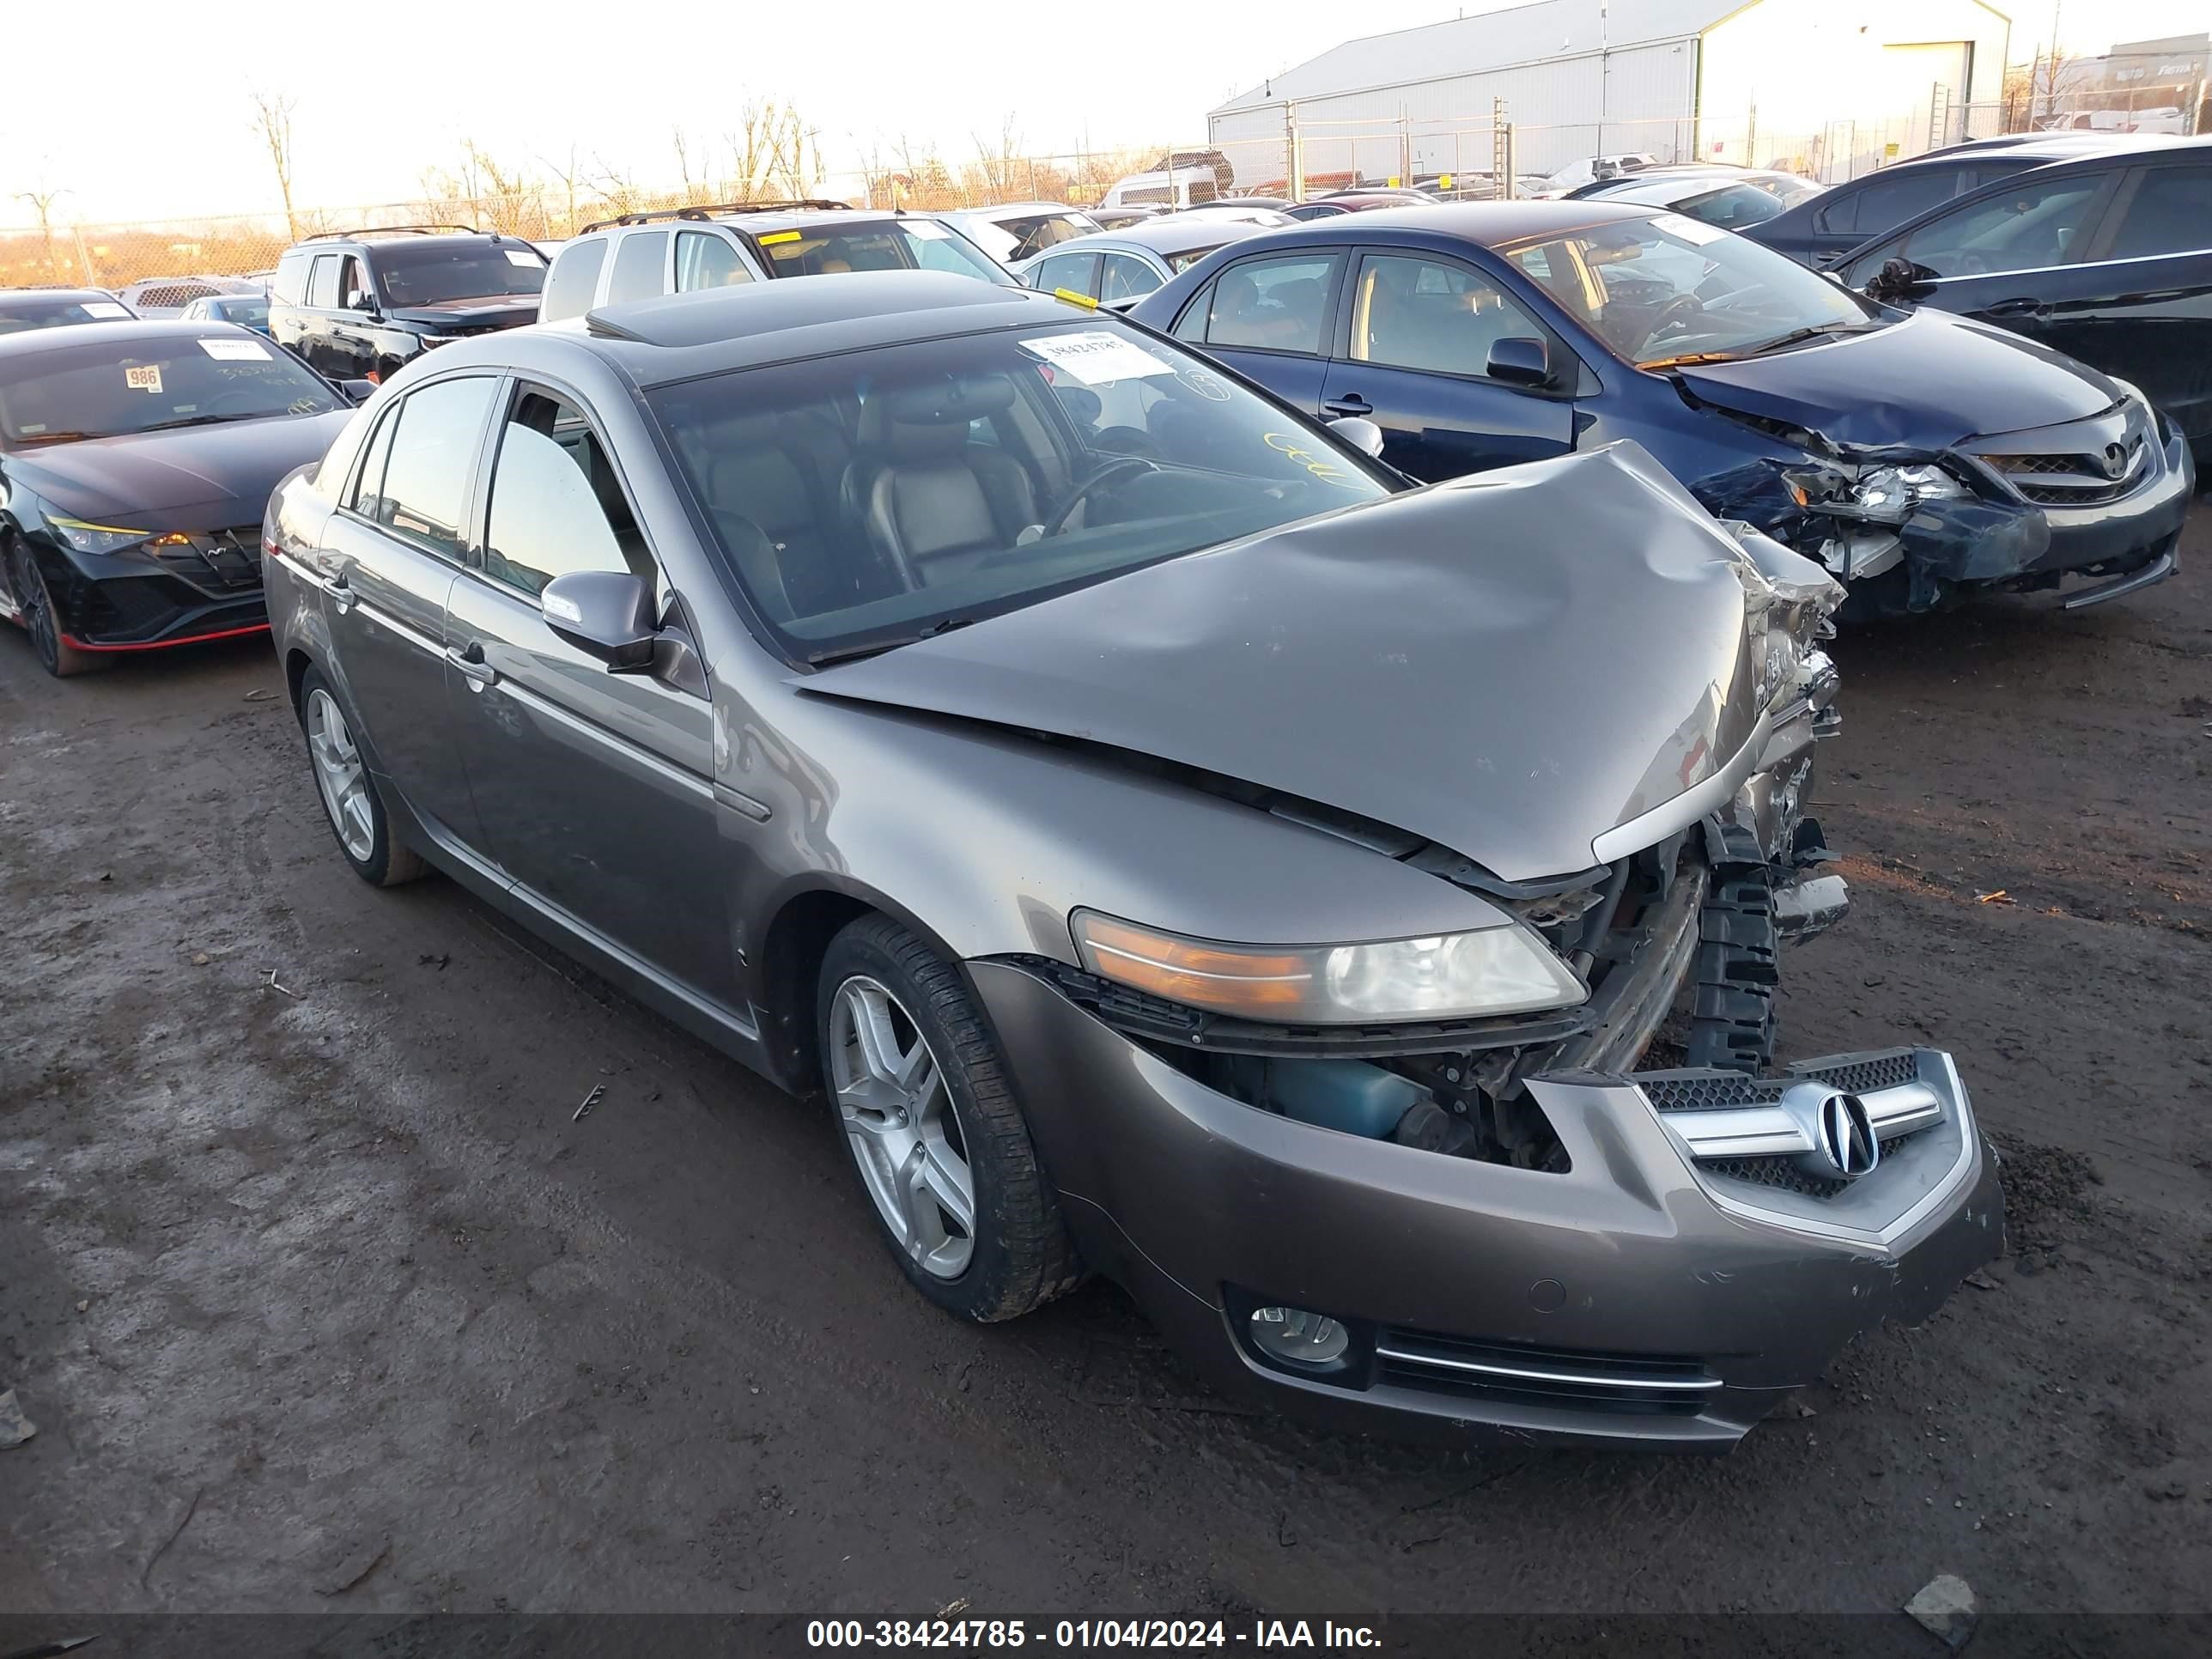 vin: 19UUA66218A014037 19UUA66218A014037 2008 acura tl 3200 for Sale in 45069, 10100 Windisch Rd, West Chester, Ohio, USA